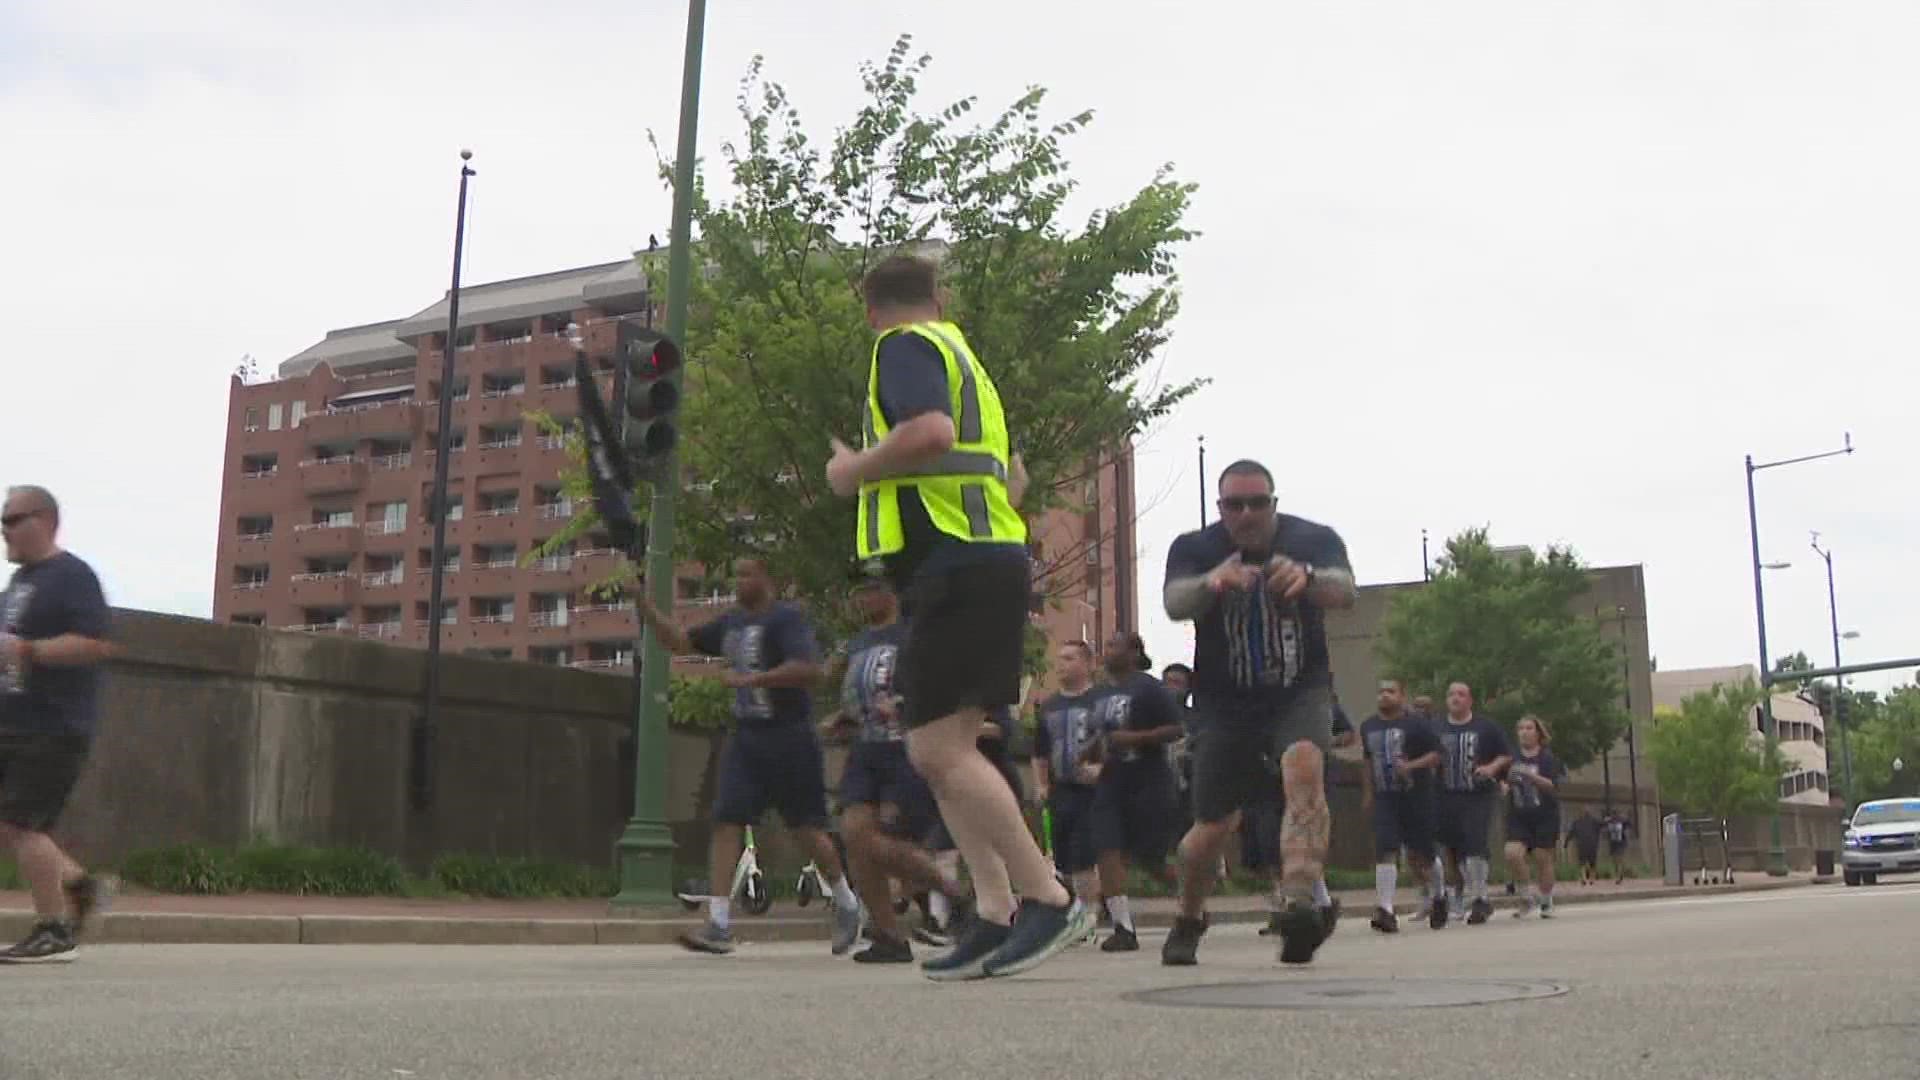 The runners started at Wegmans in Virginia Beach around 7:30 a.m. They went all the way to Norfolk, where they passed off the torch to another waiting team.